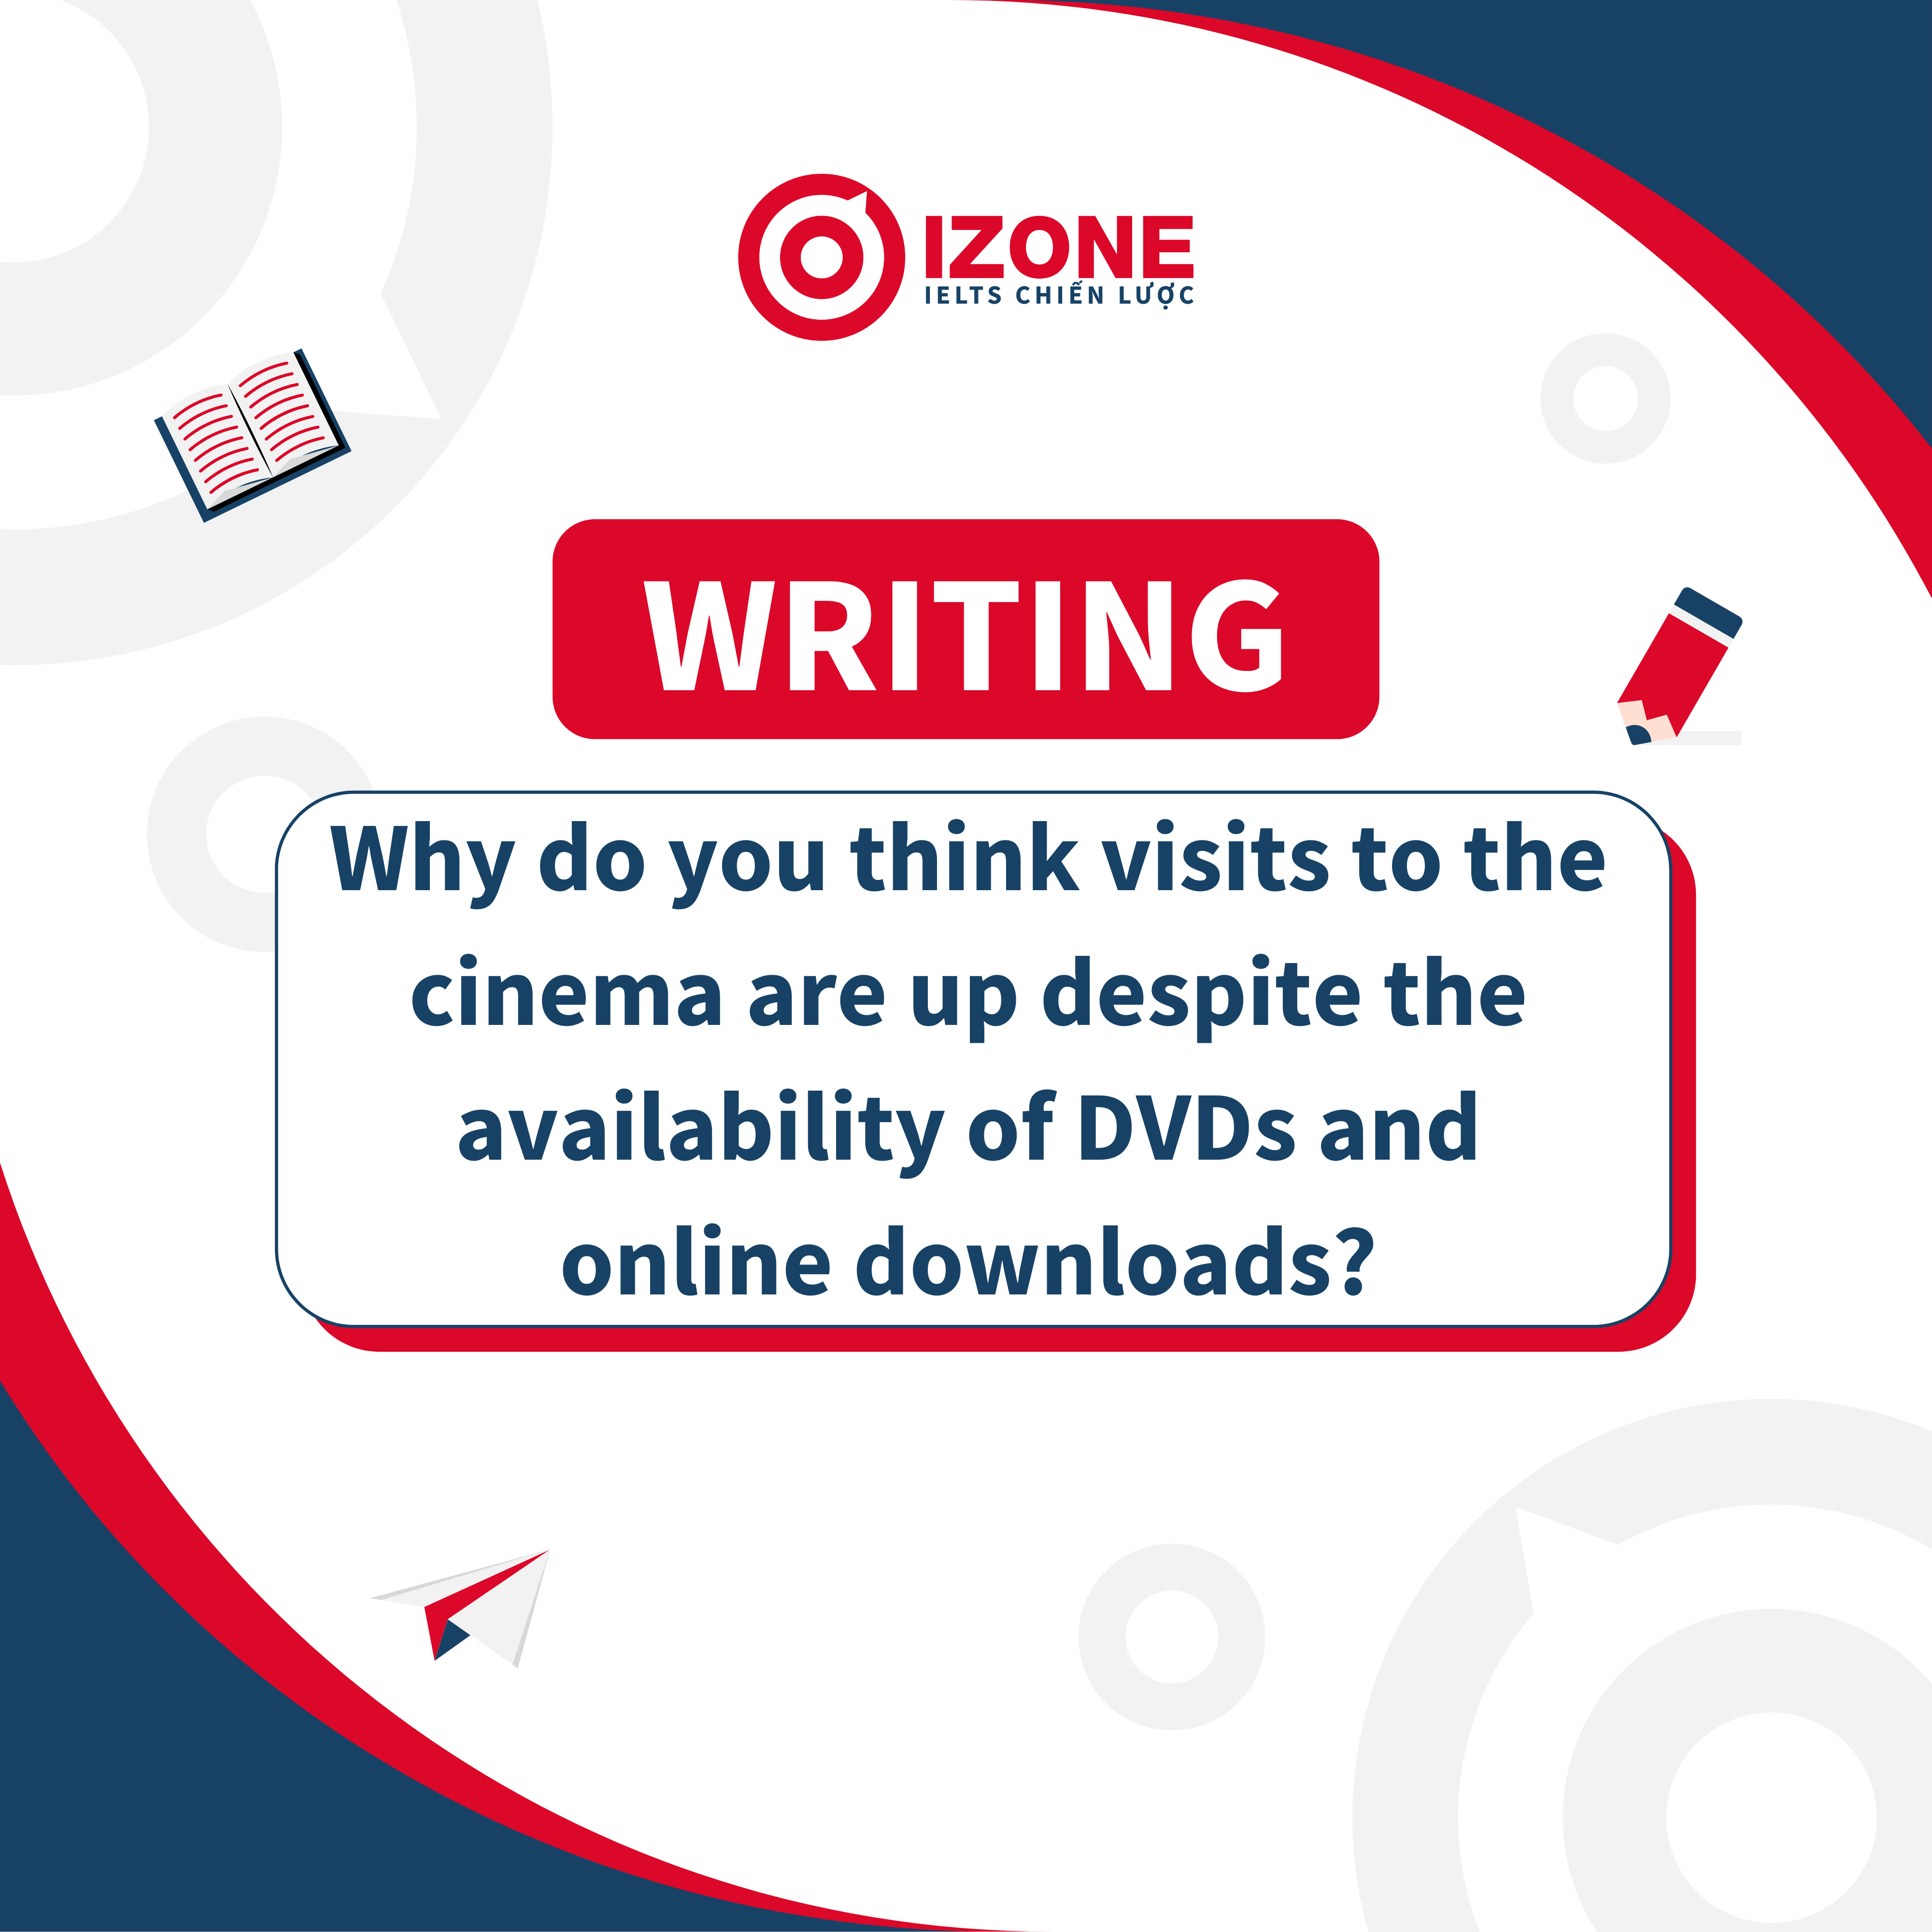 Cách triển khai câu hỏi “Statistics show that visits to the cinema are up despite the availability of DVDs and online downloads. Why do you think this might be?”